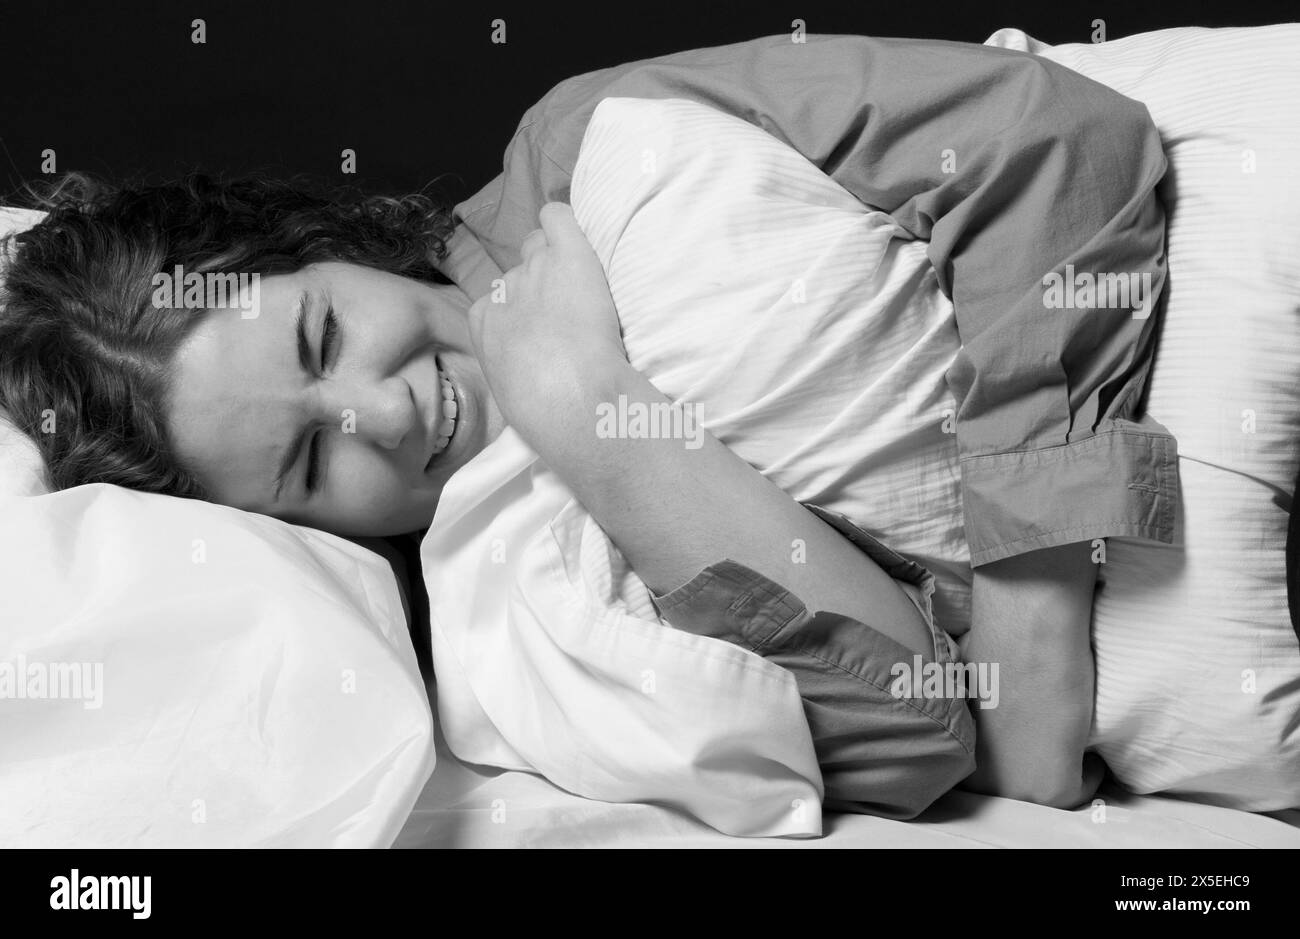 Young woman holding a pillow to her stomach, experiencing stomachache or cramps.Concept of stomachache or stomach cramps. USA Stock Photo